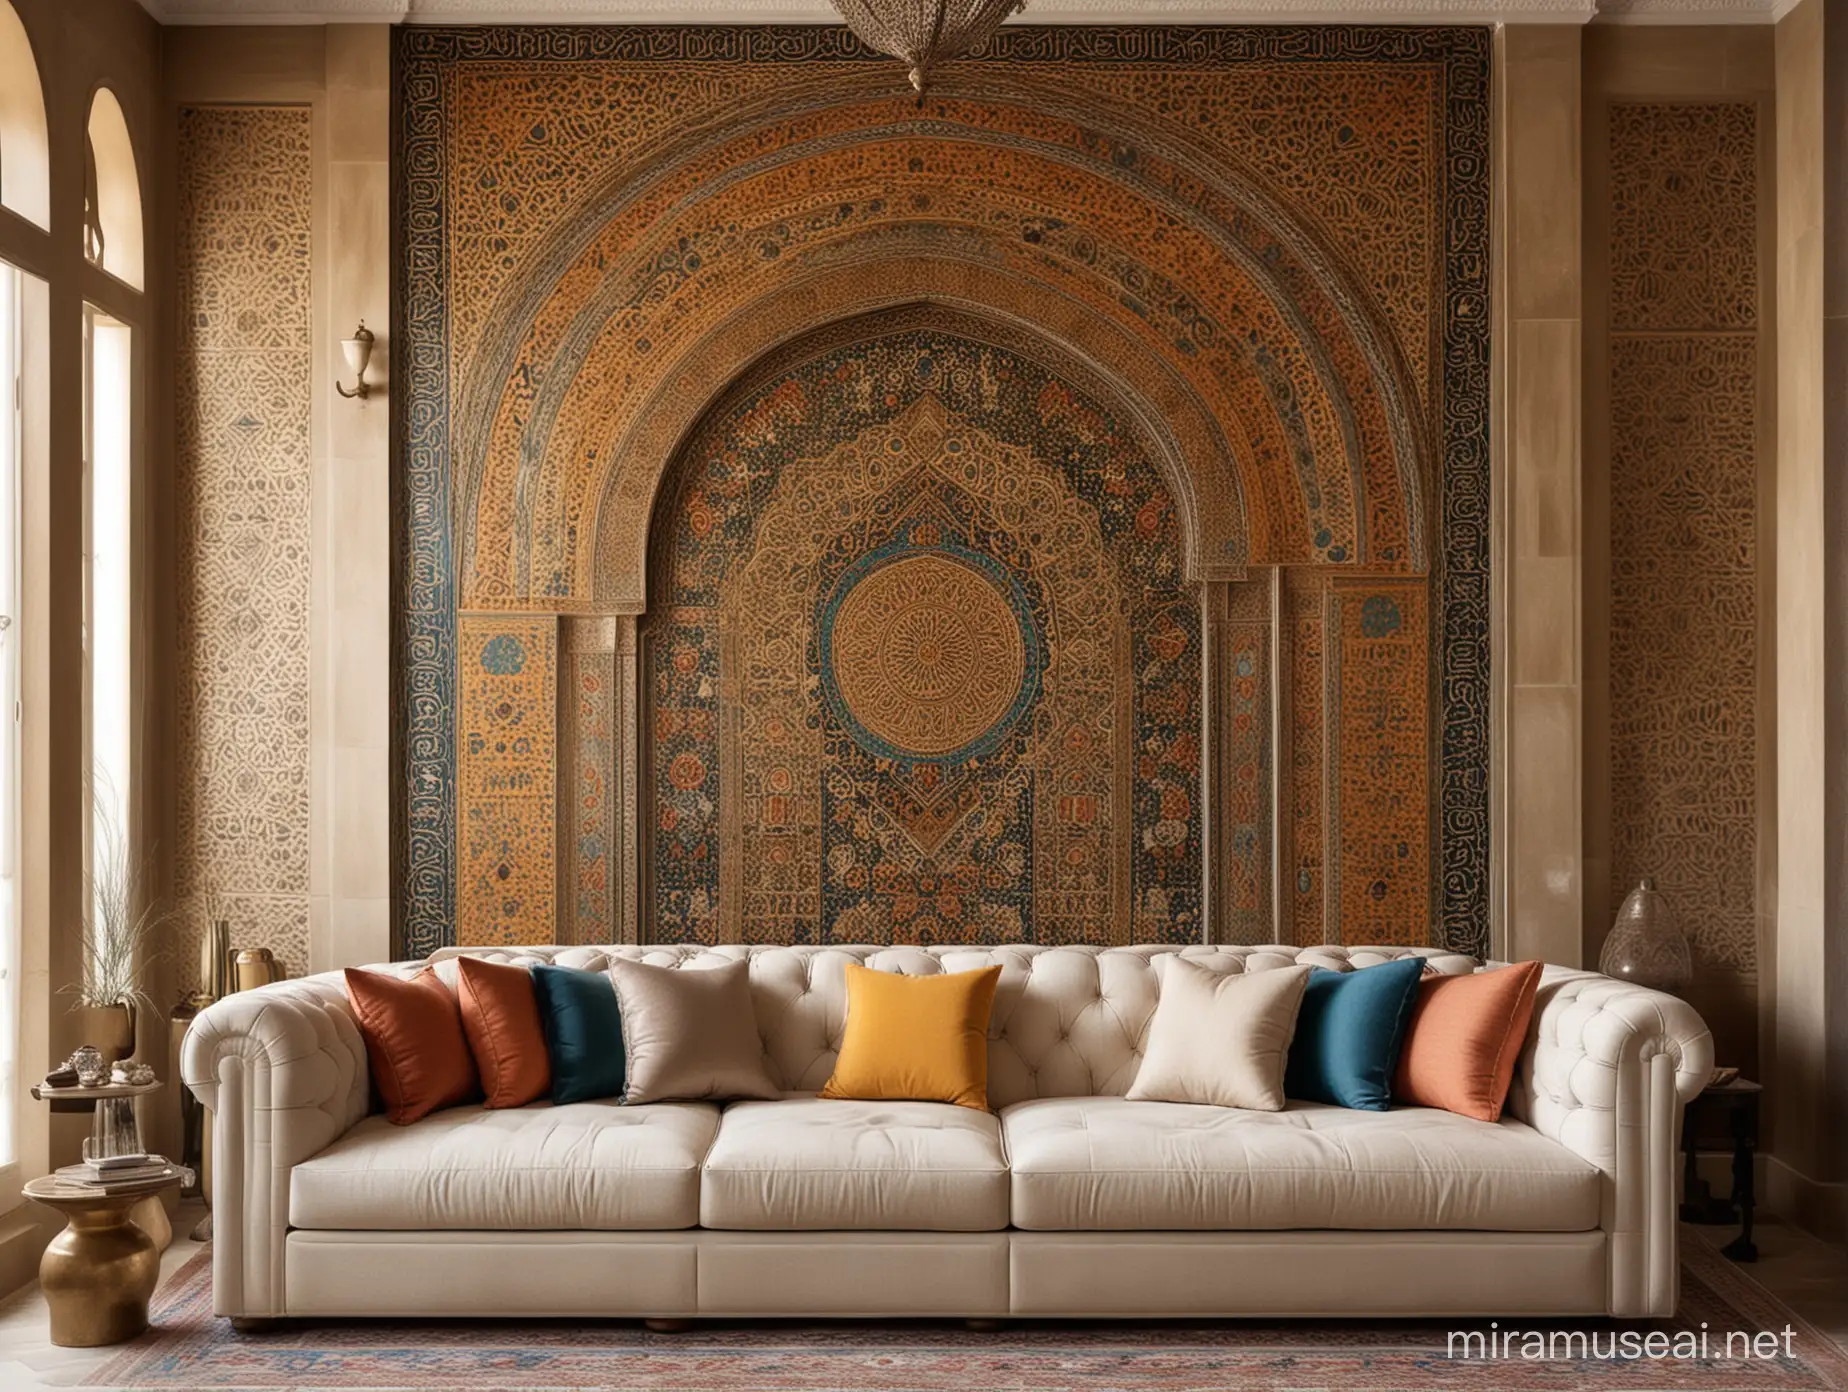 Elegant Fusion of Folkloric Arabian and Contemporary Egyptian Art with Islamic Ornaments